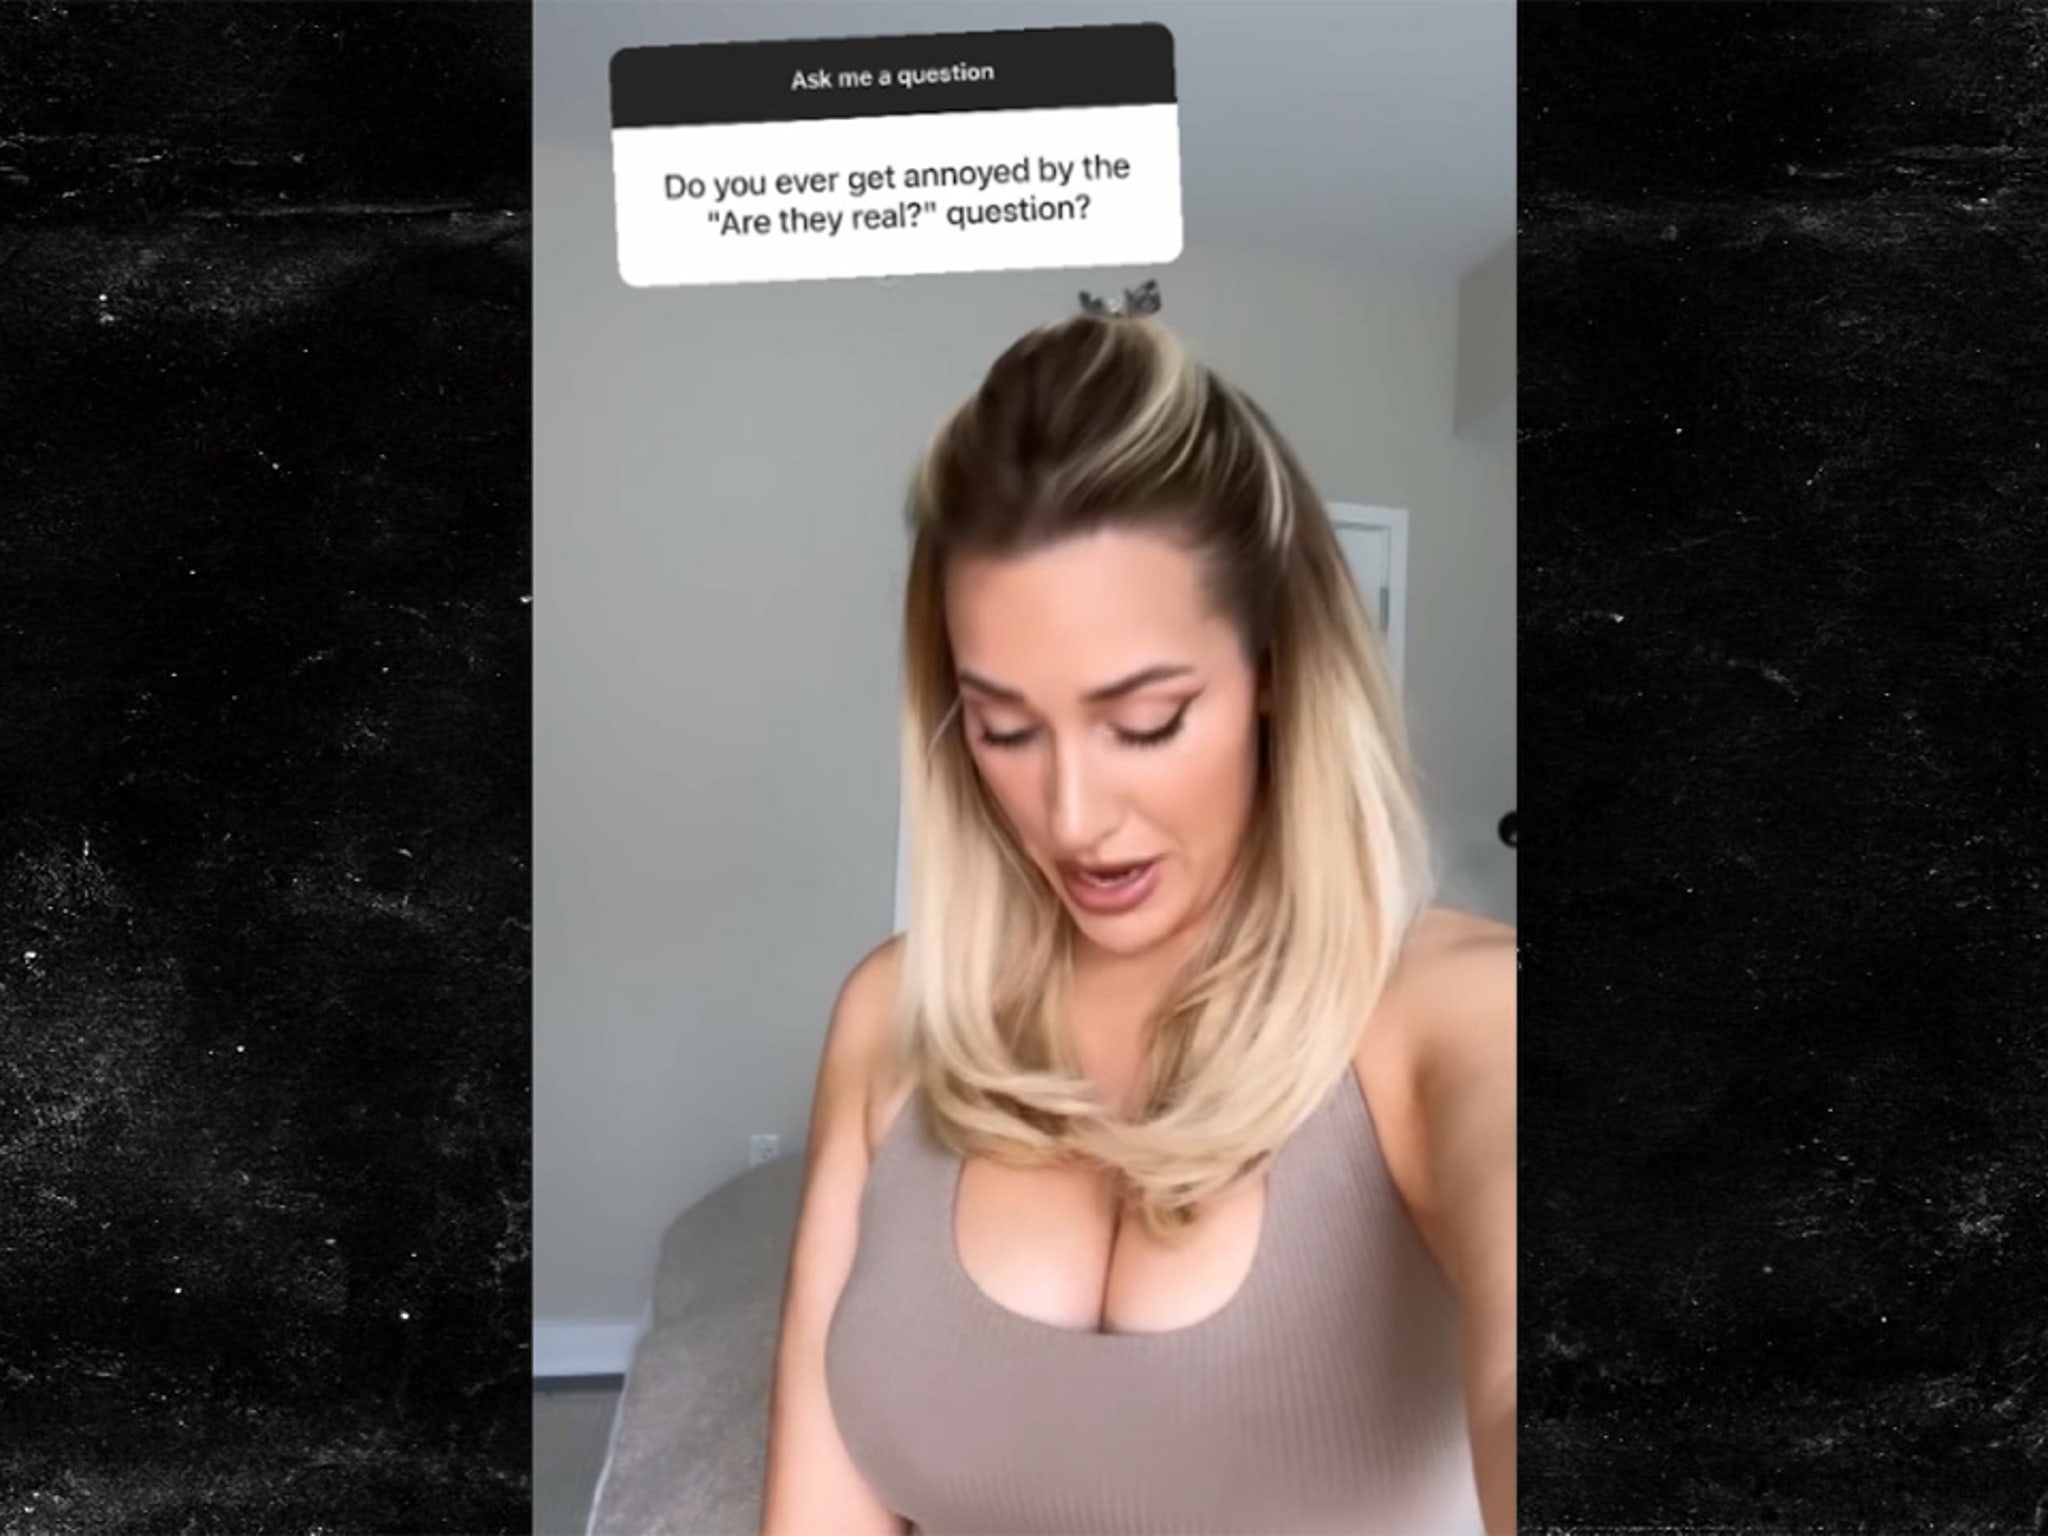 Paige Spiranac looking to bring out 'bobble head boobs' as